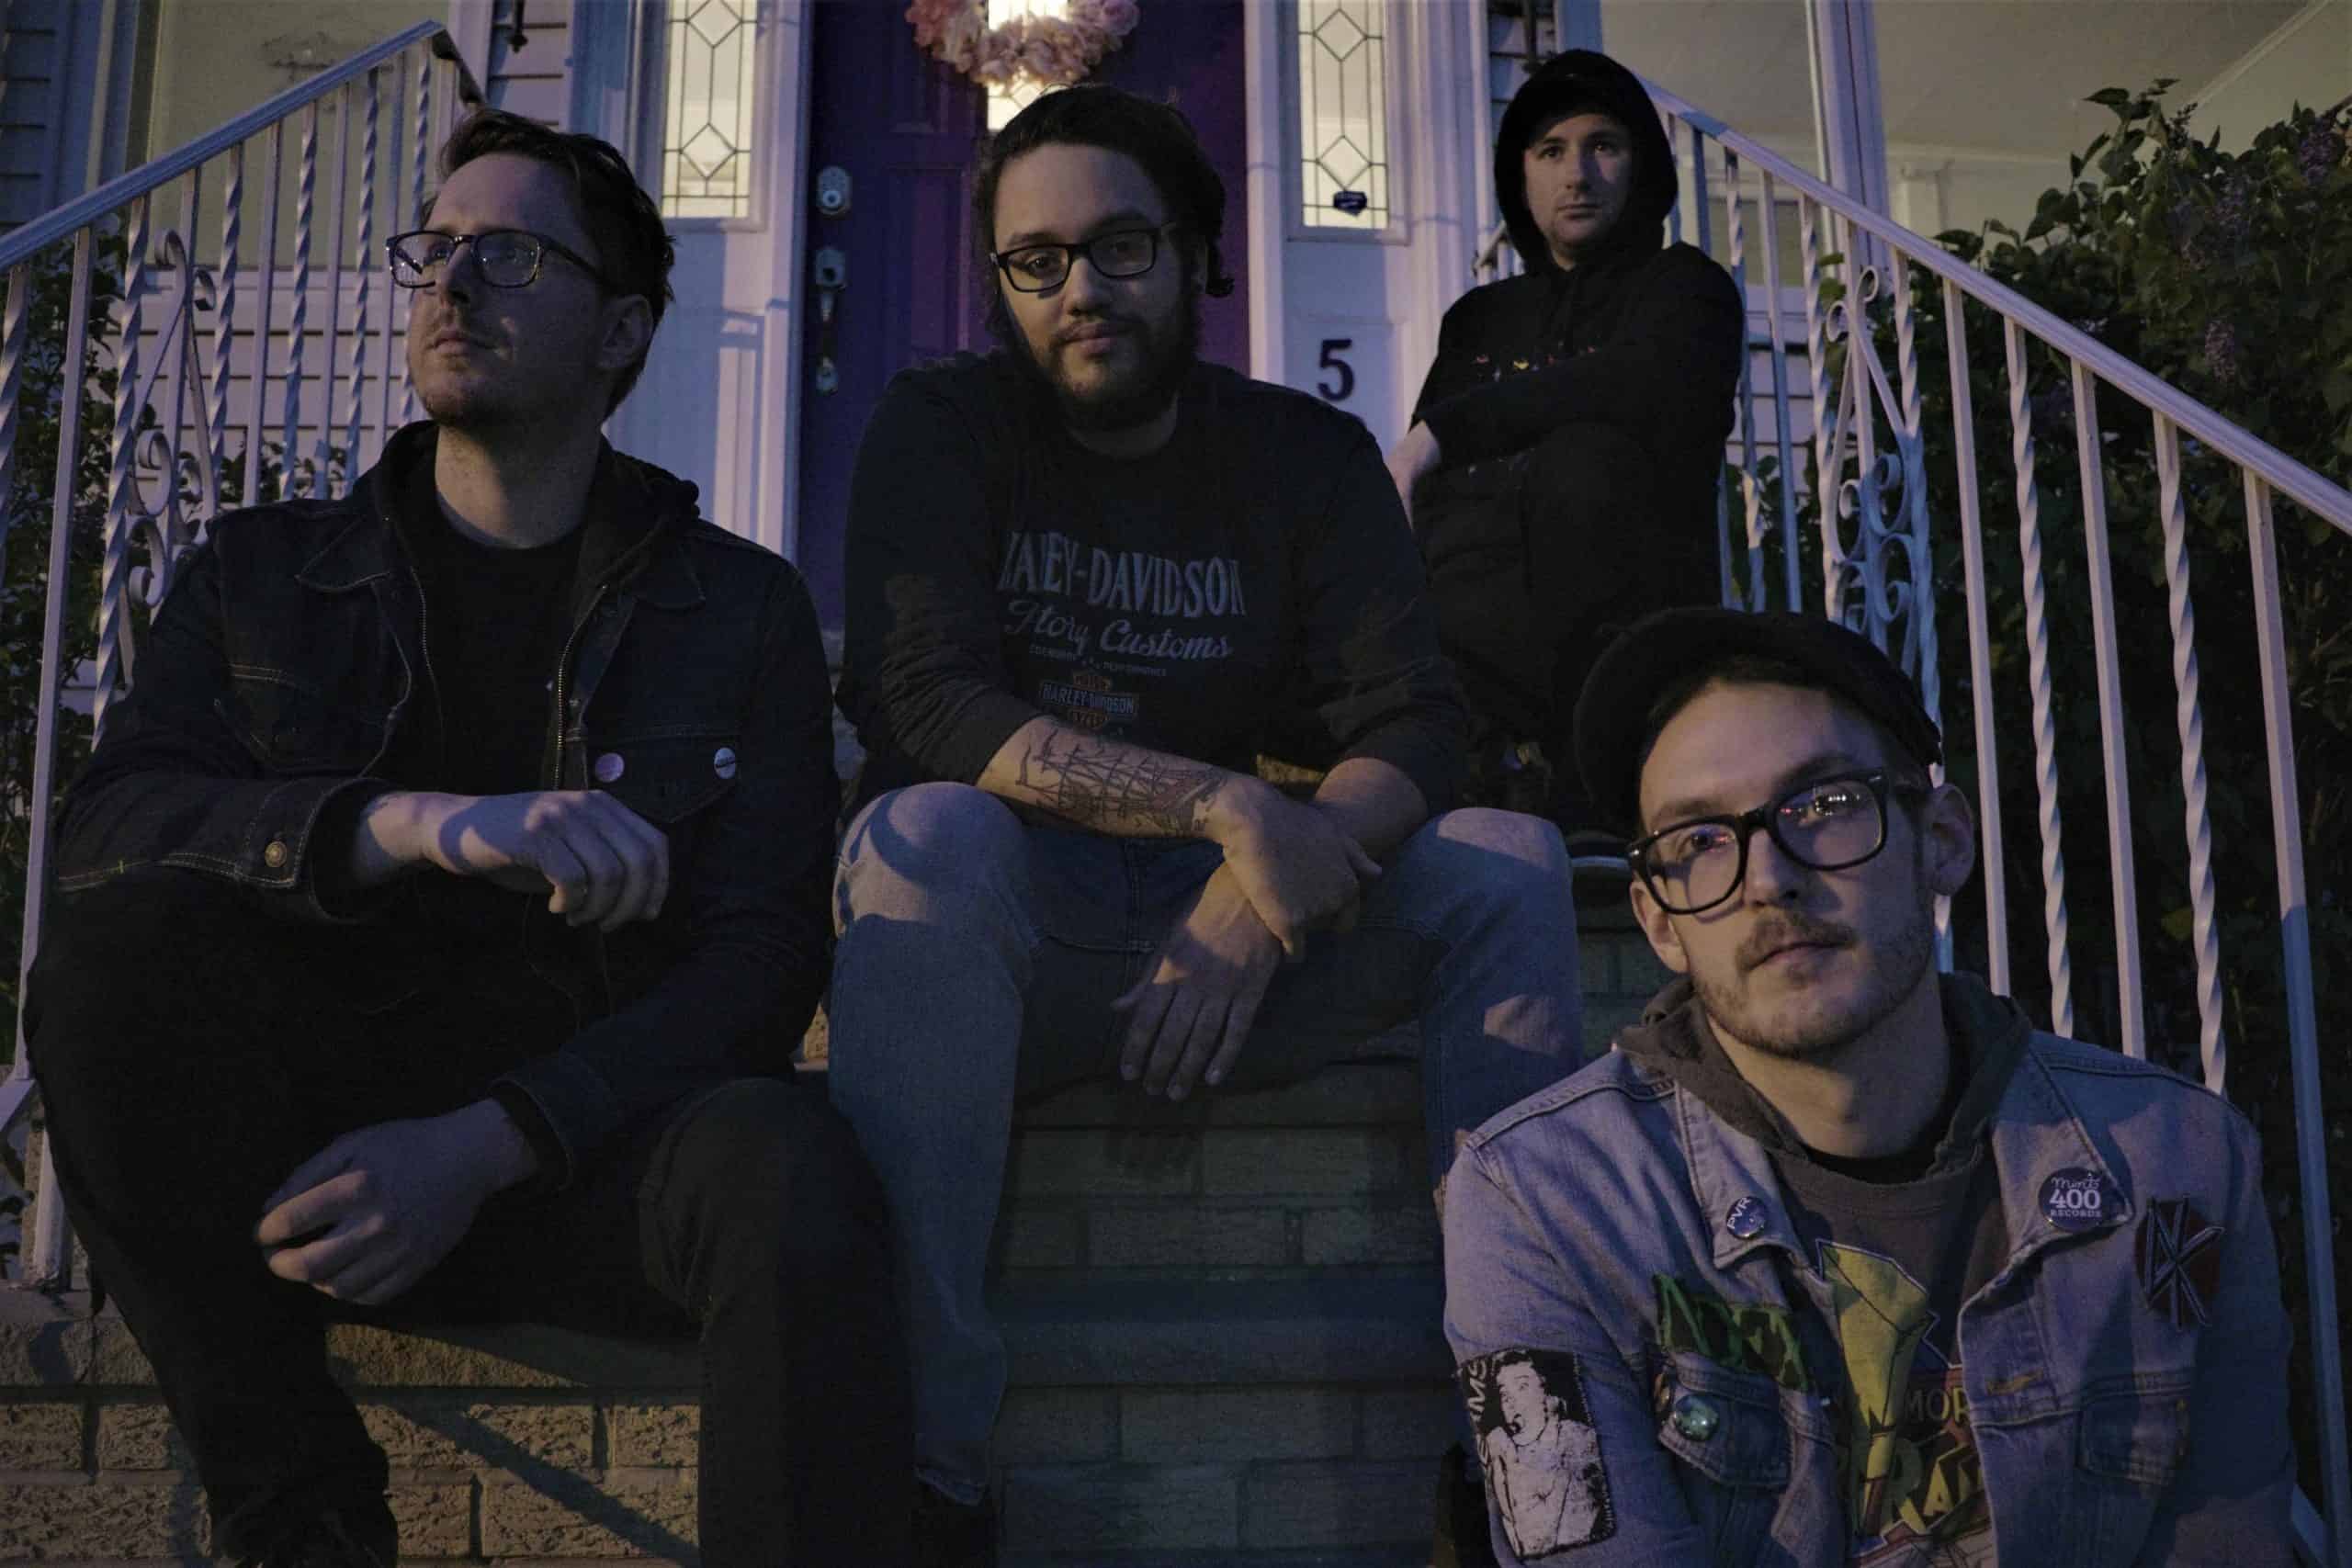 Old Currents release single “No Signs of Life” from upcoming album “The Glory, The Defeat”